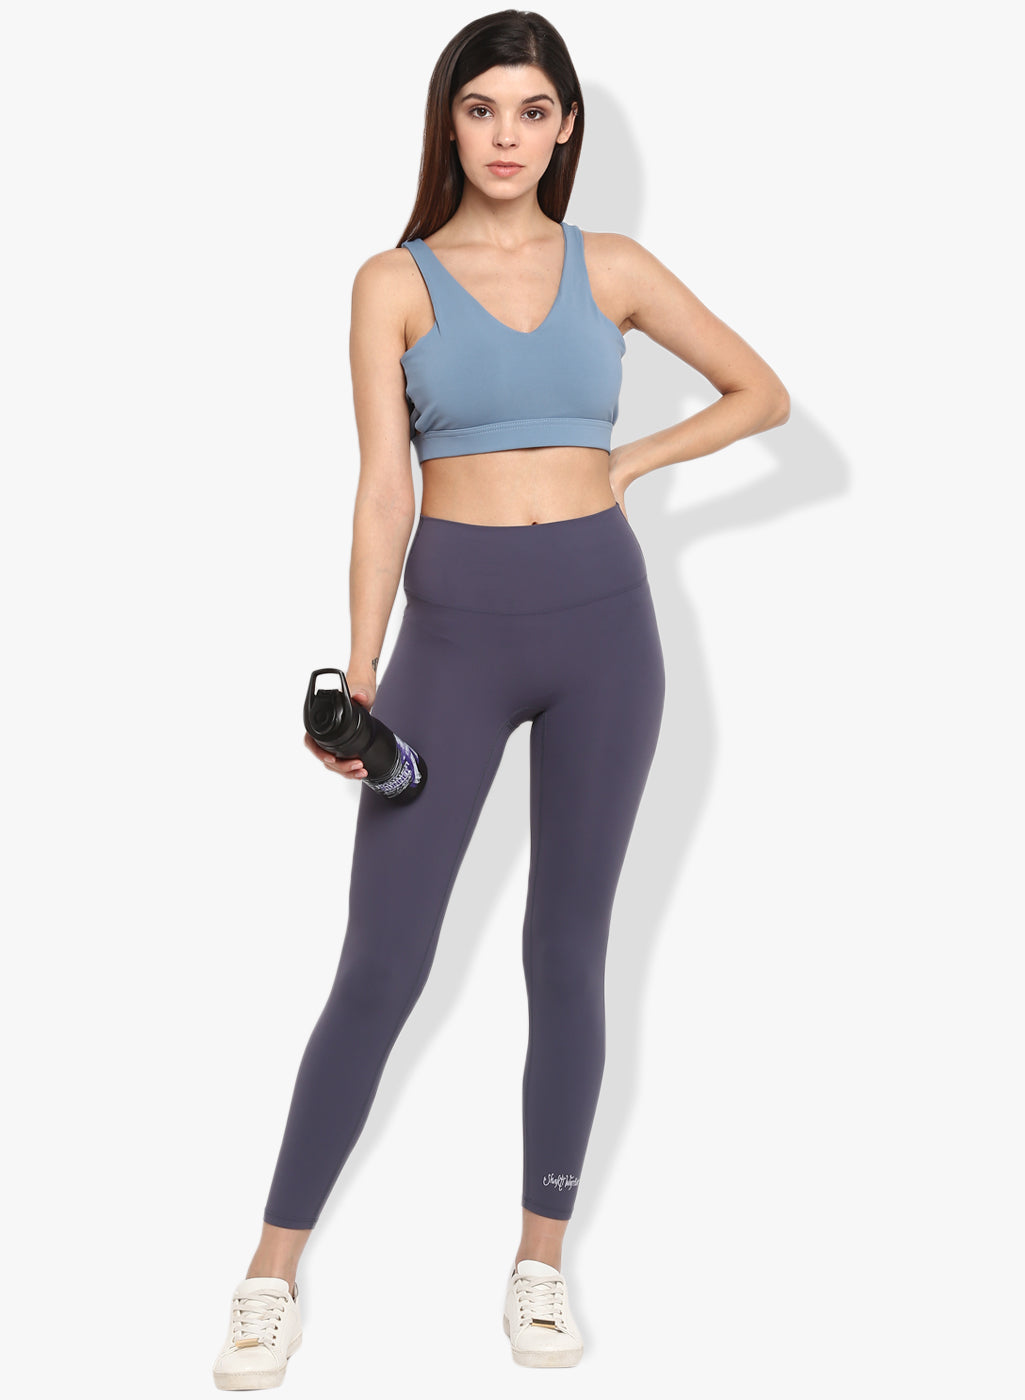 Affordable Workout Leggings For Women